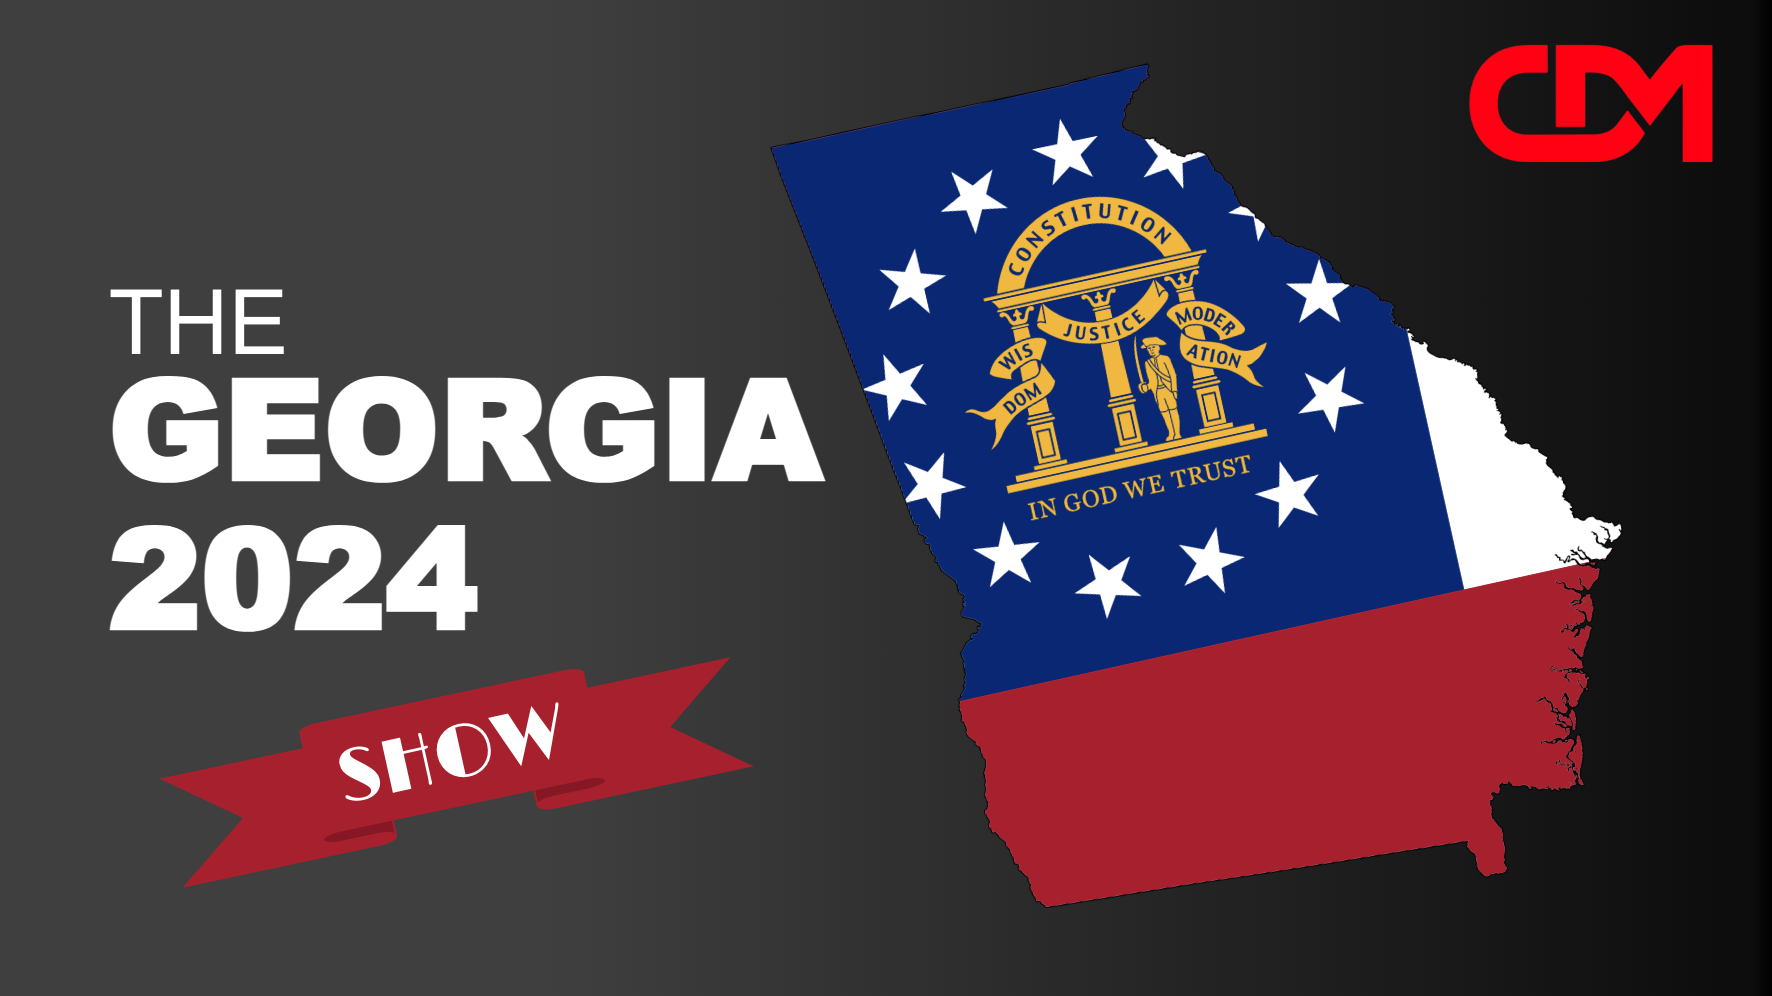 LIVE 7pm EST: The Georgia 2024 Show! With Field Searcy/Sam Carnline, David Cross